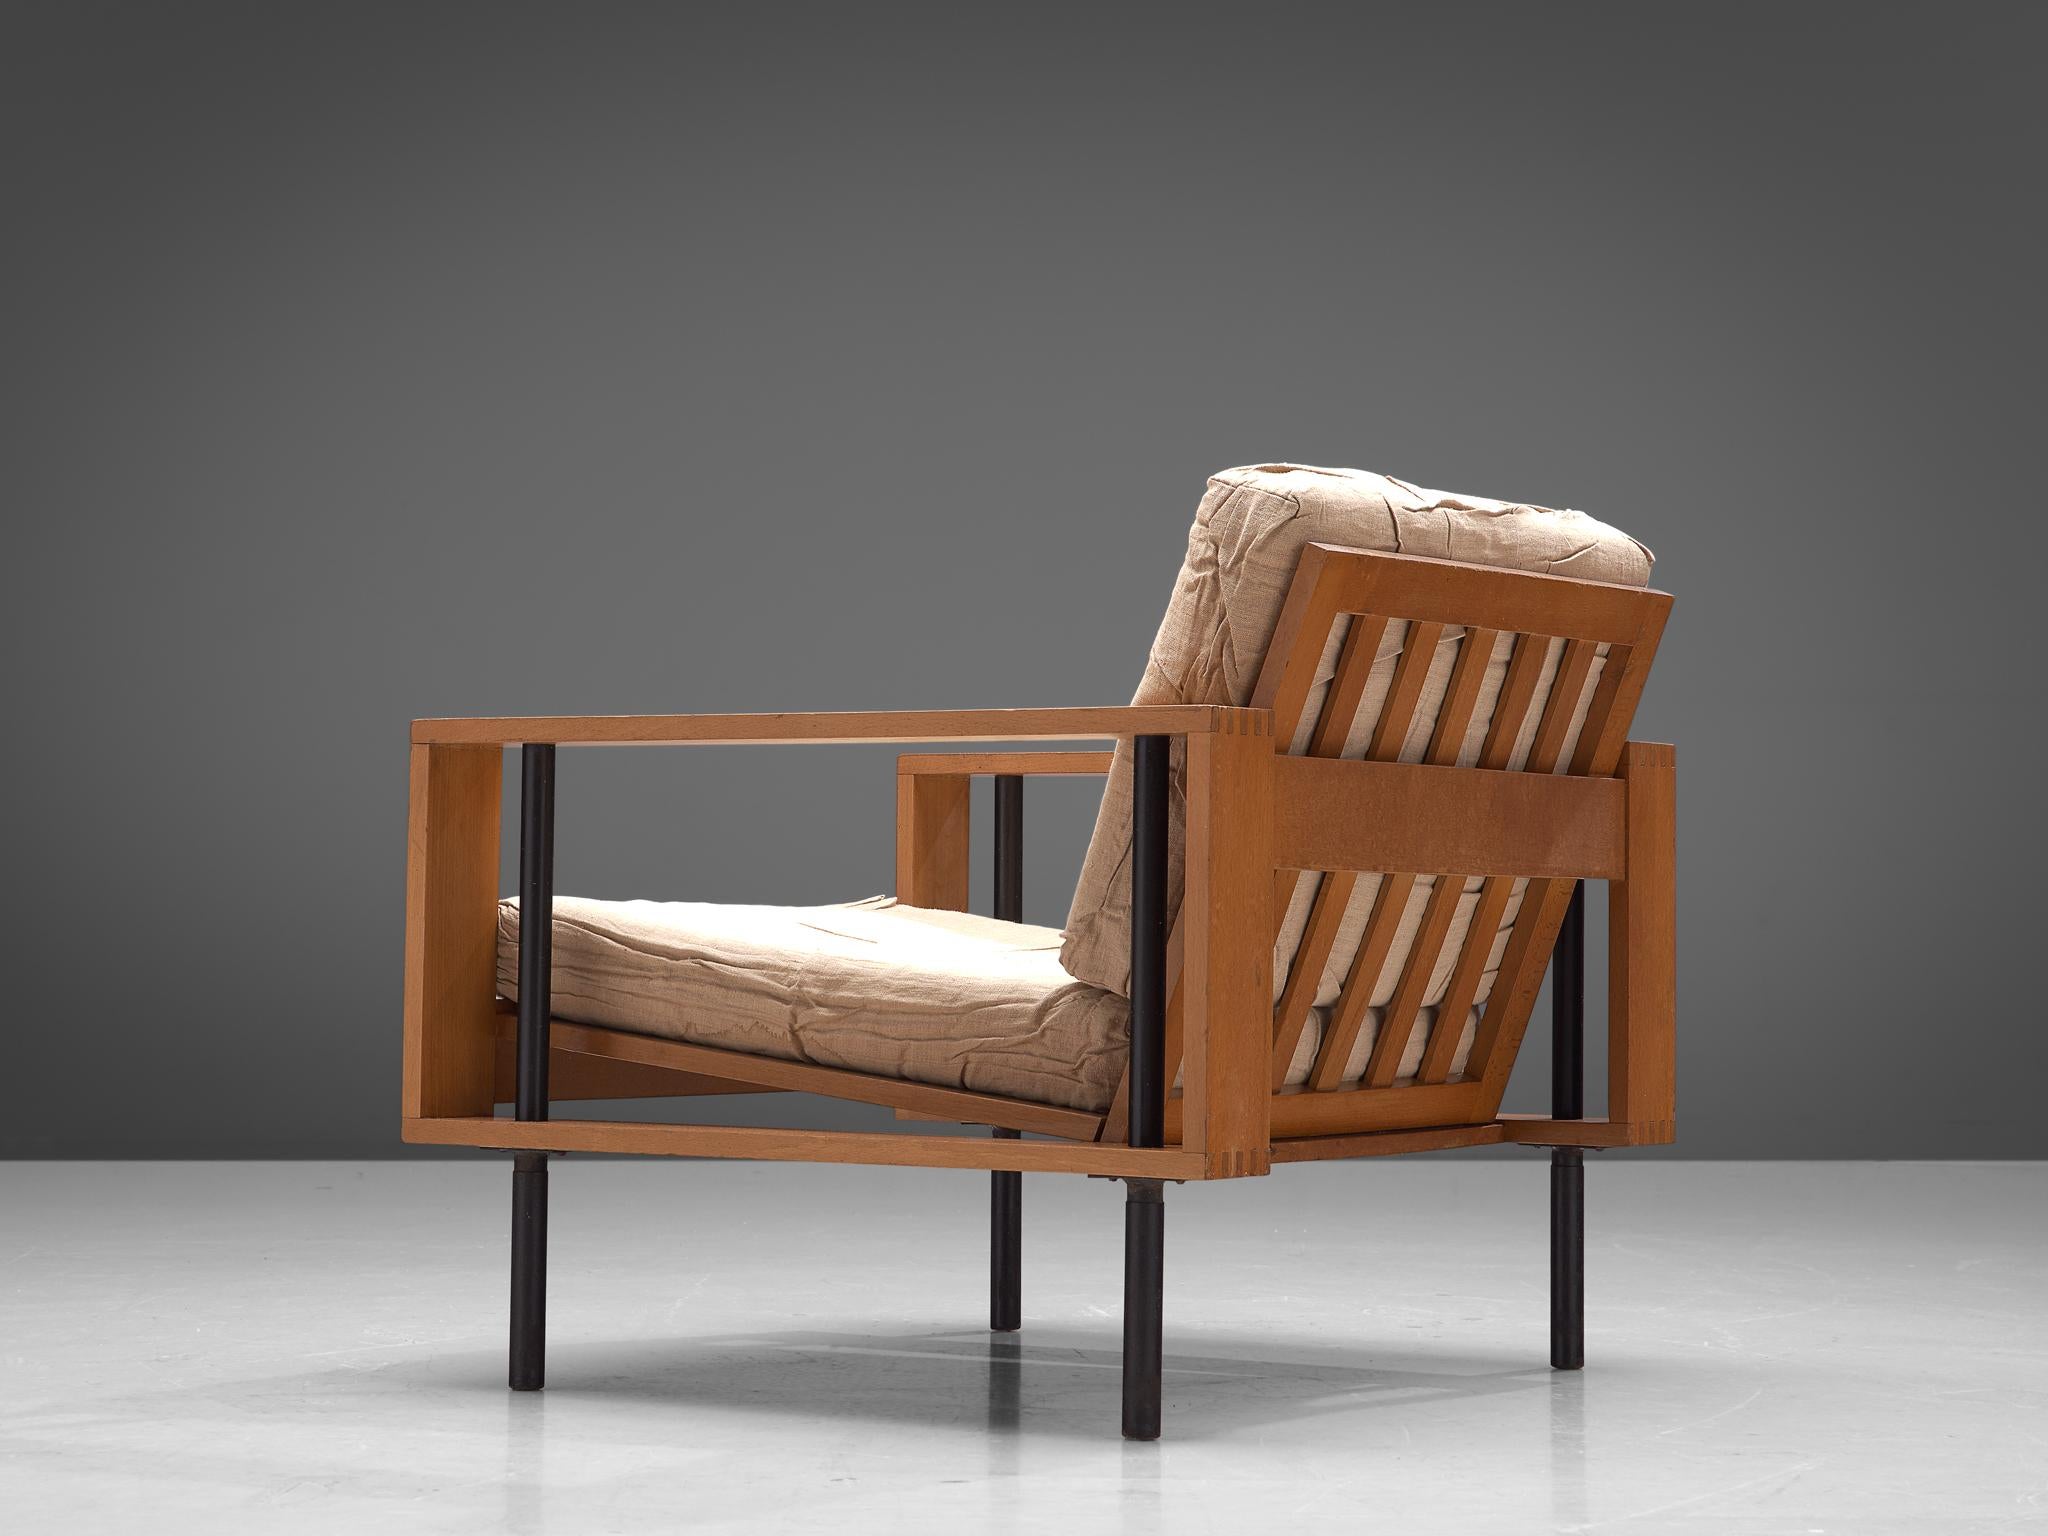 Lounge chair, stained wood, fabric, Europe, 1950s

This streamlined design convinces the viewer's eye through the linear plan and open elements. The armrests are composed of a cubic-shaped framework through which iron rods are secured to function as